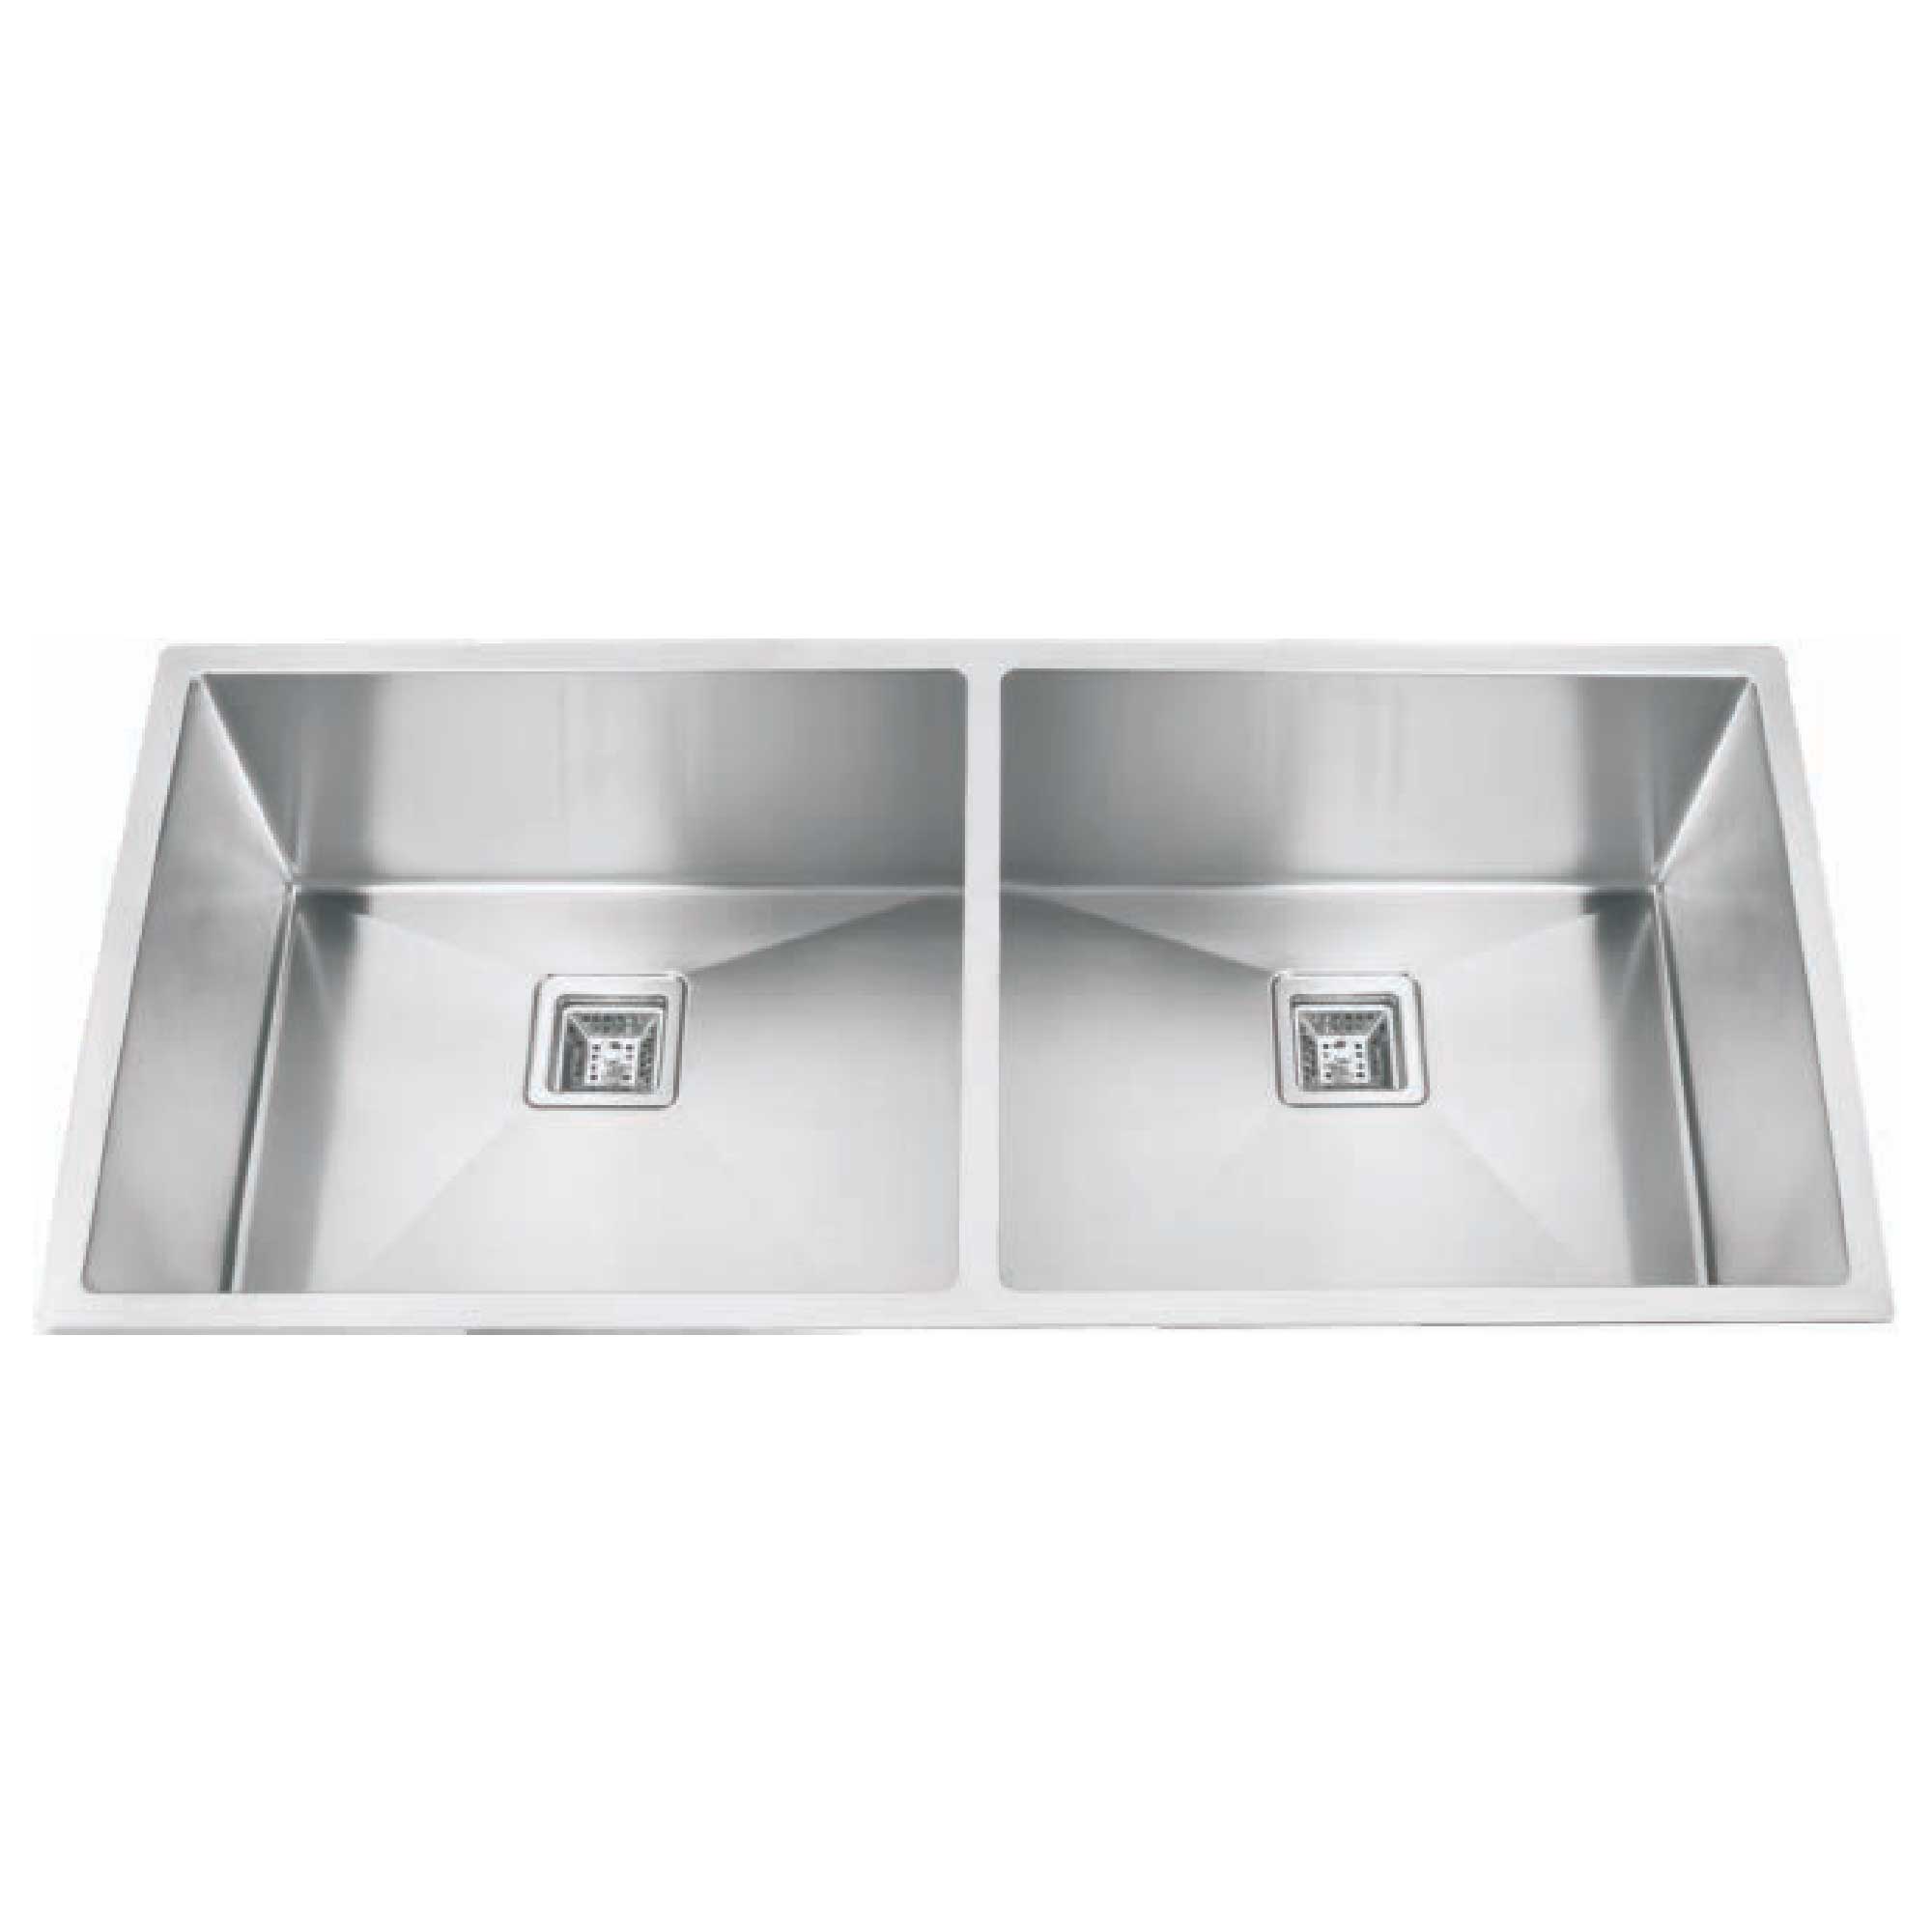 Double Bowl Sink Size:1143mm X 508mm X 250mm (45"x20"x10")